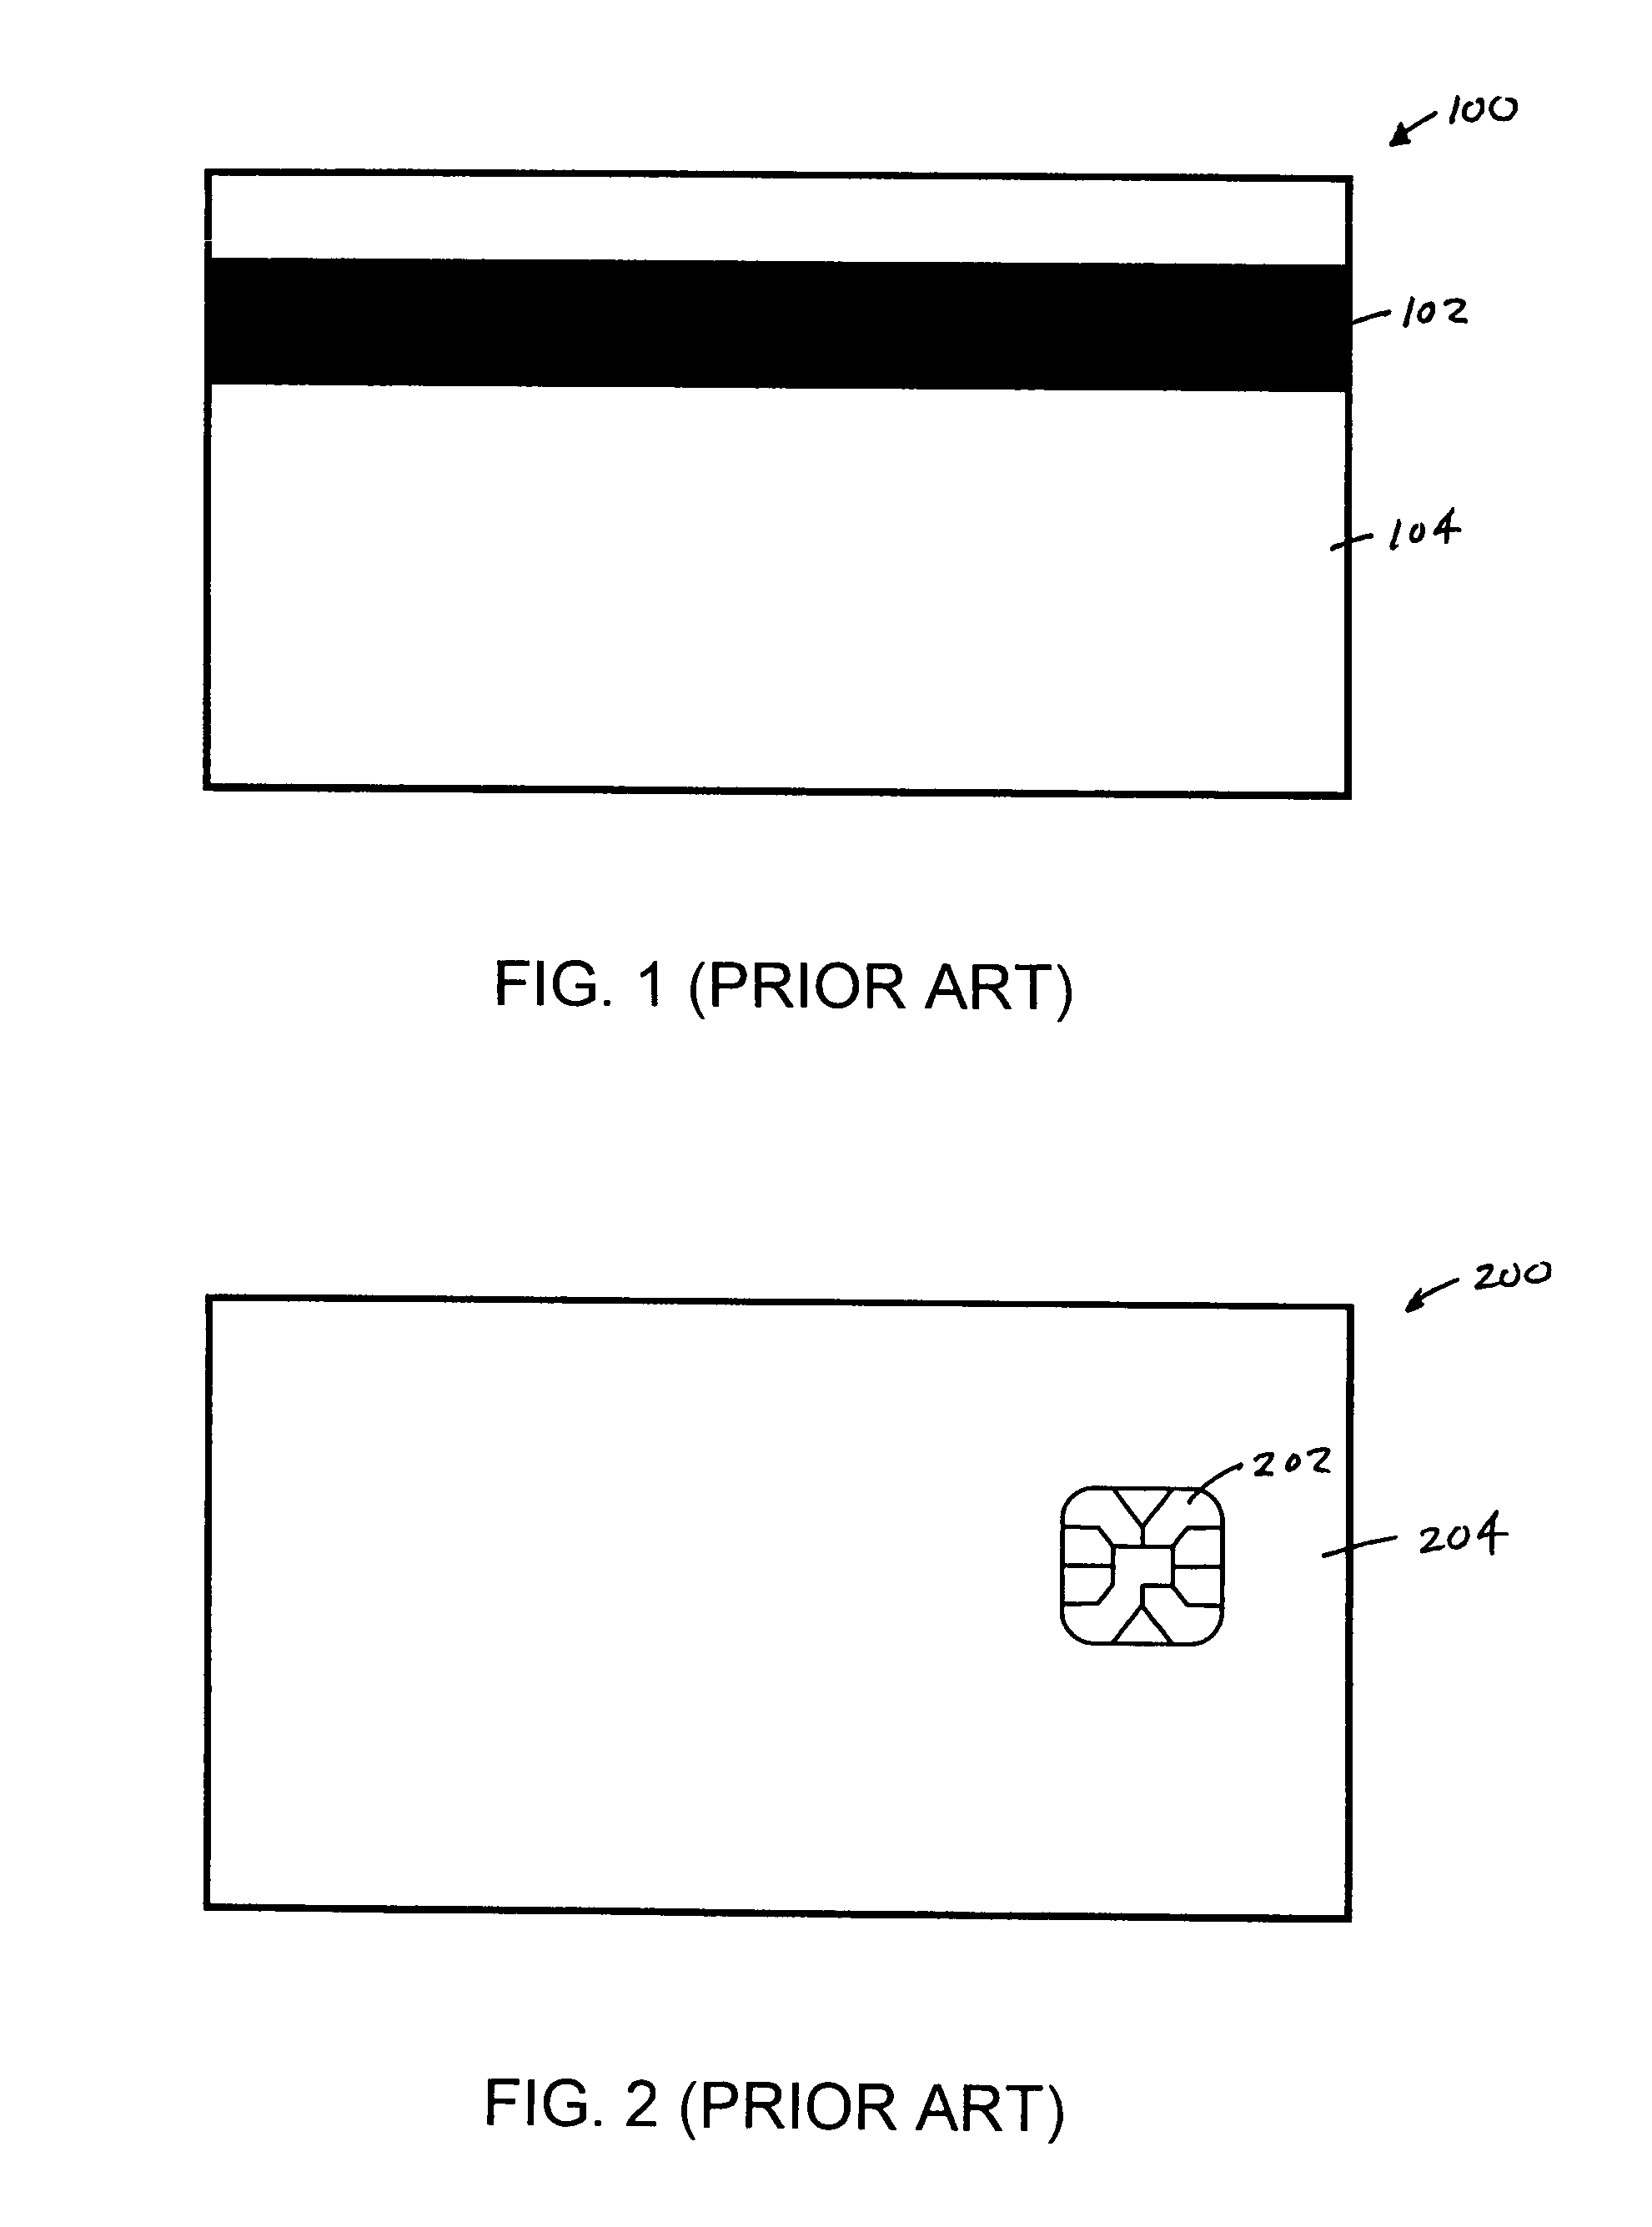 System, method and apparatus for enabling transactions using a biometrically enabled programmable magnetic stripe